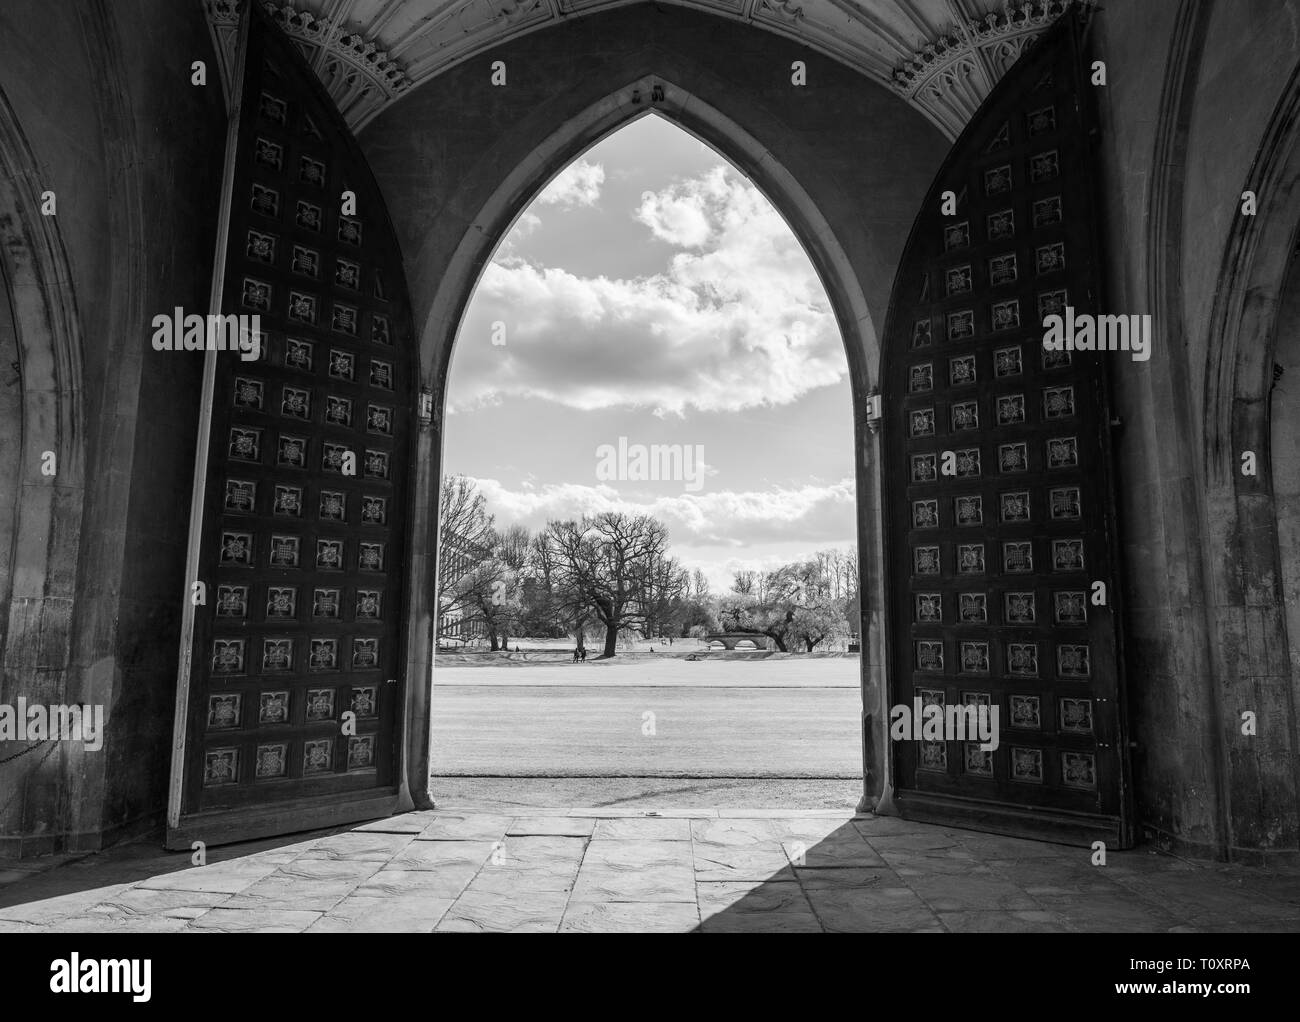 Cambridge, UK - March 14 2019: St Johns College which is a member of the Univarsity of Cambridge, Cambridge, England. Stock Photo